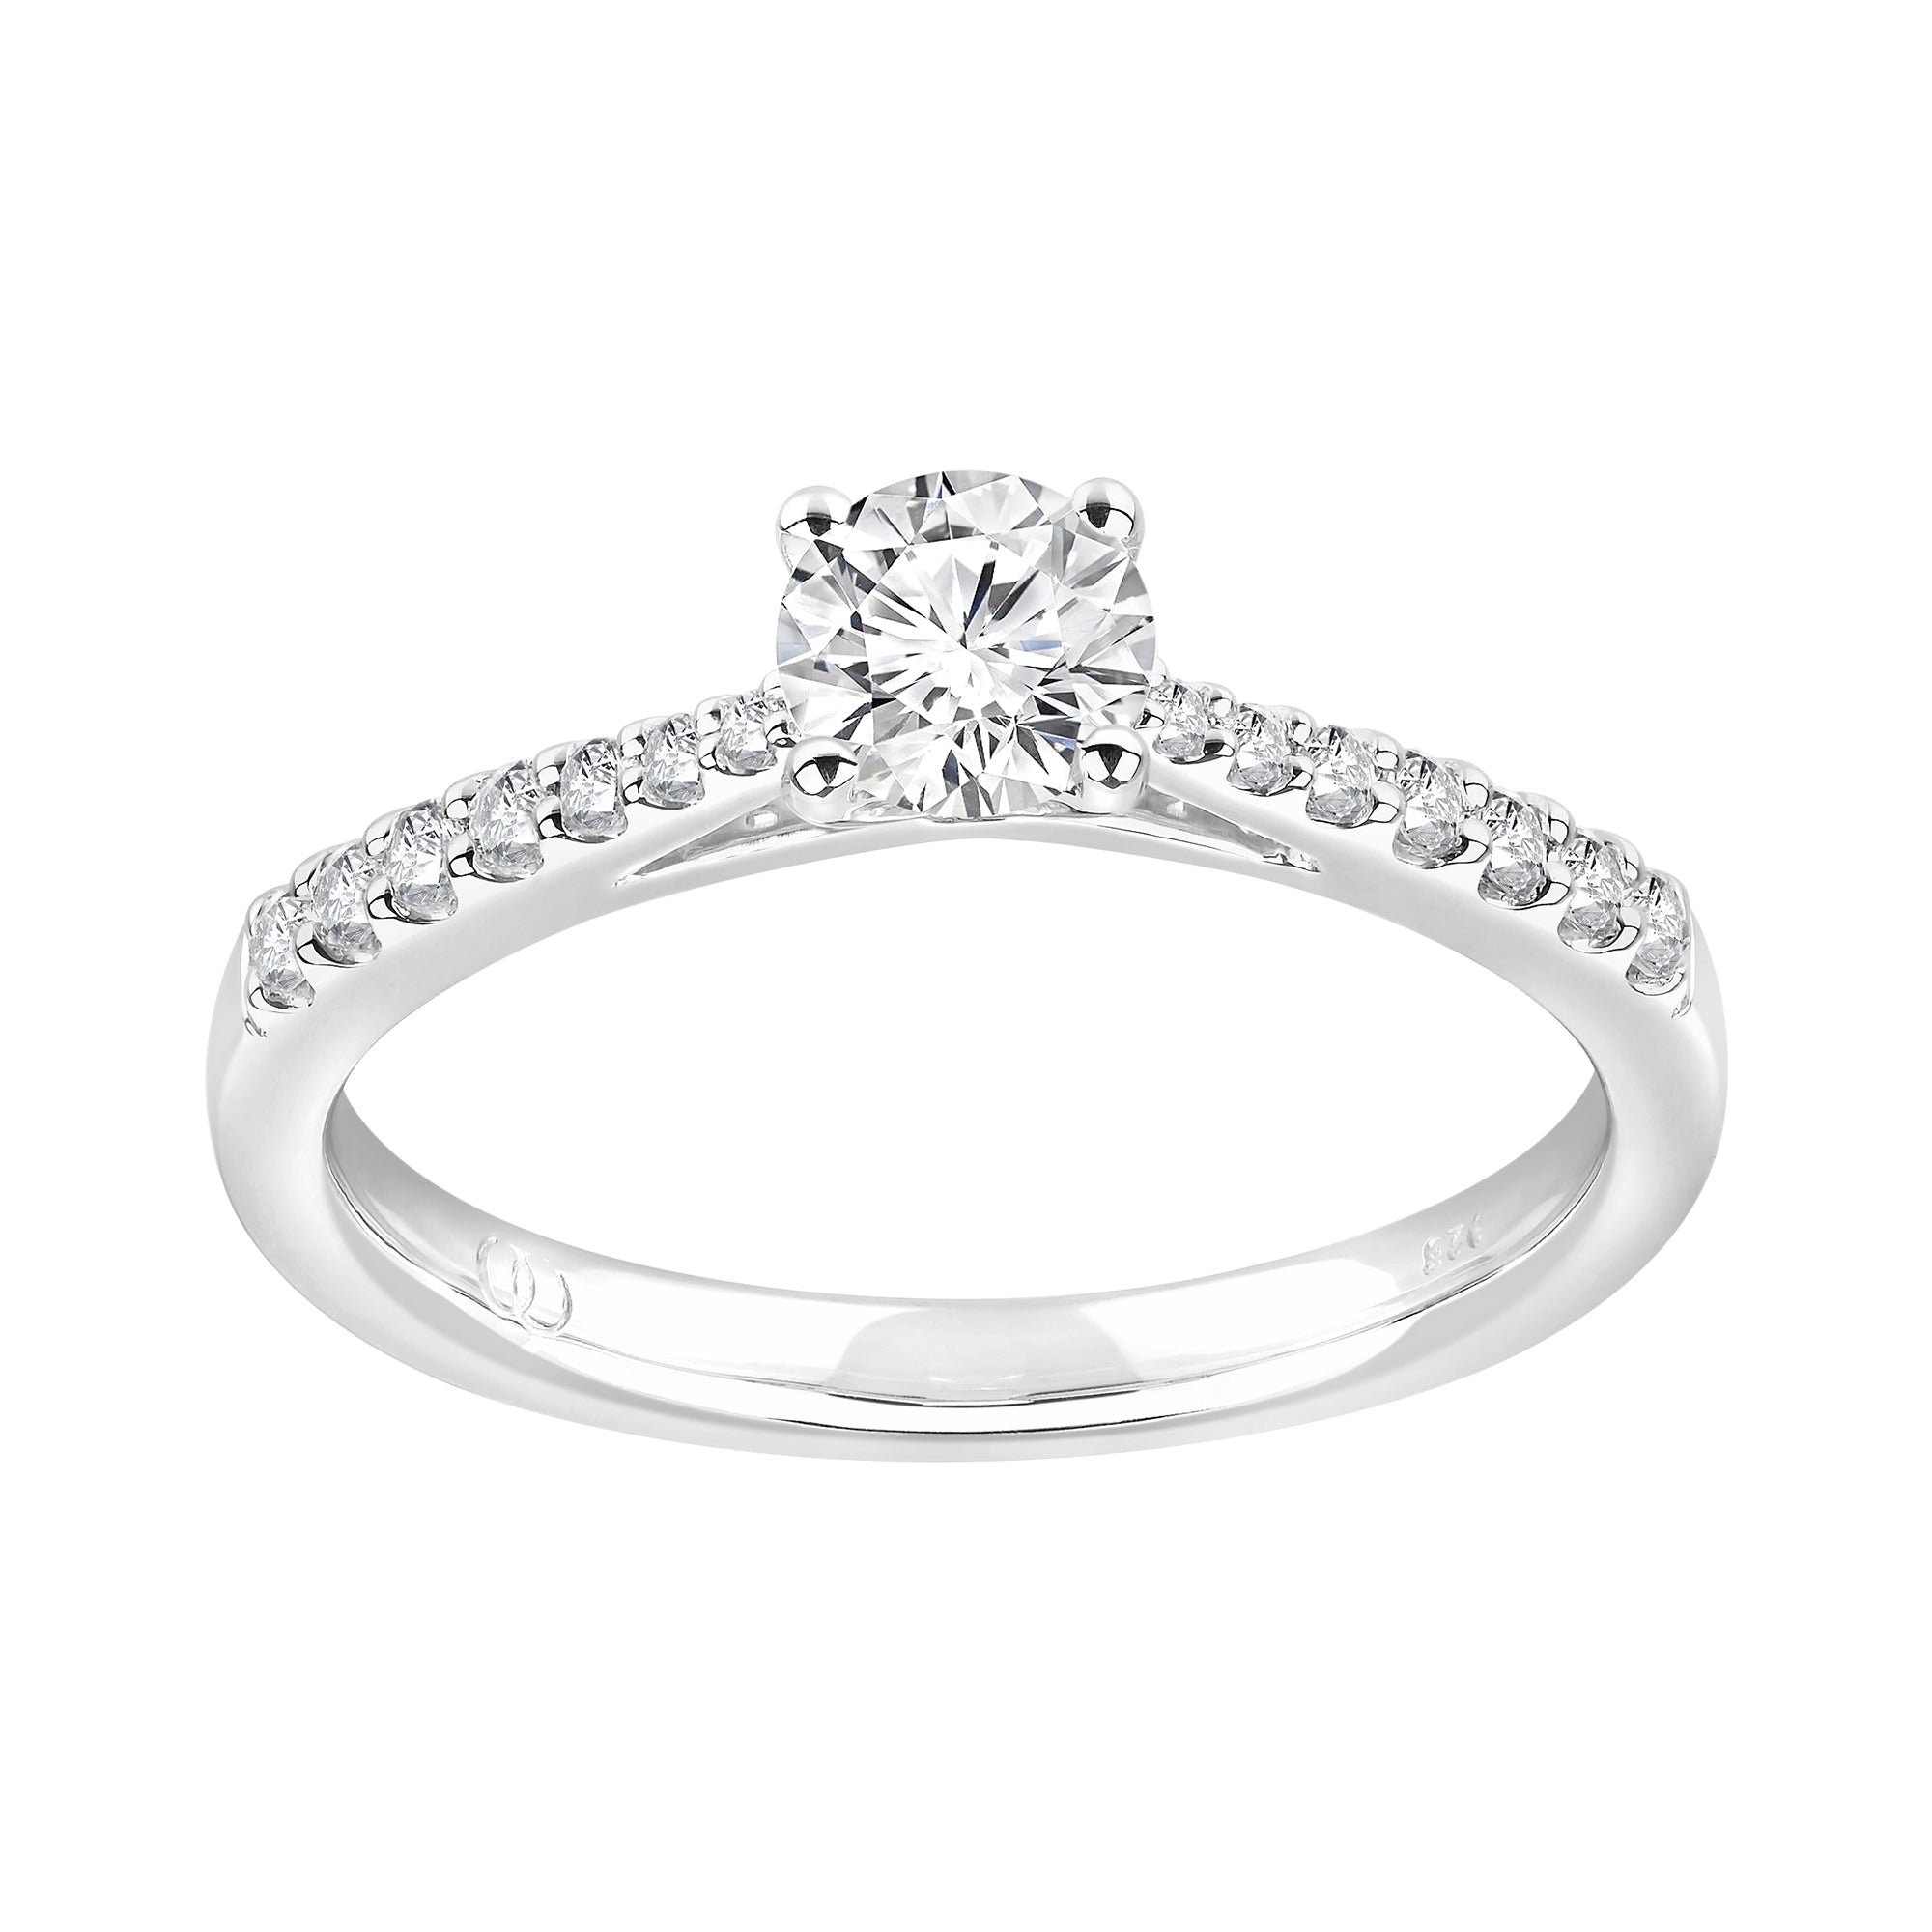 Sterling Silver Cubic Zirconia 0.50ct Ring - AK1035 - Hallmark Jewellers Formby & The Jewellers Bench Widnes